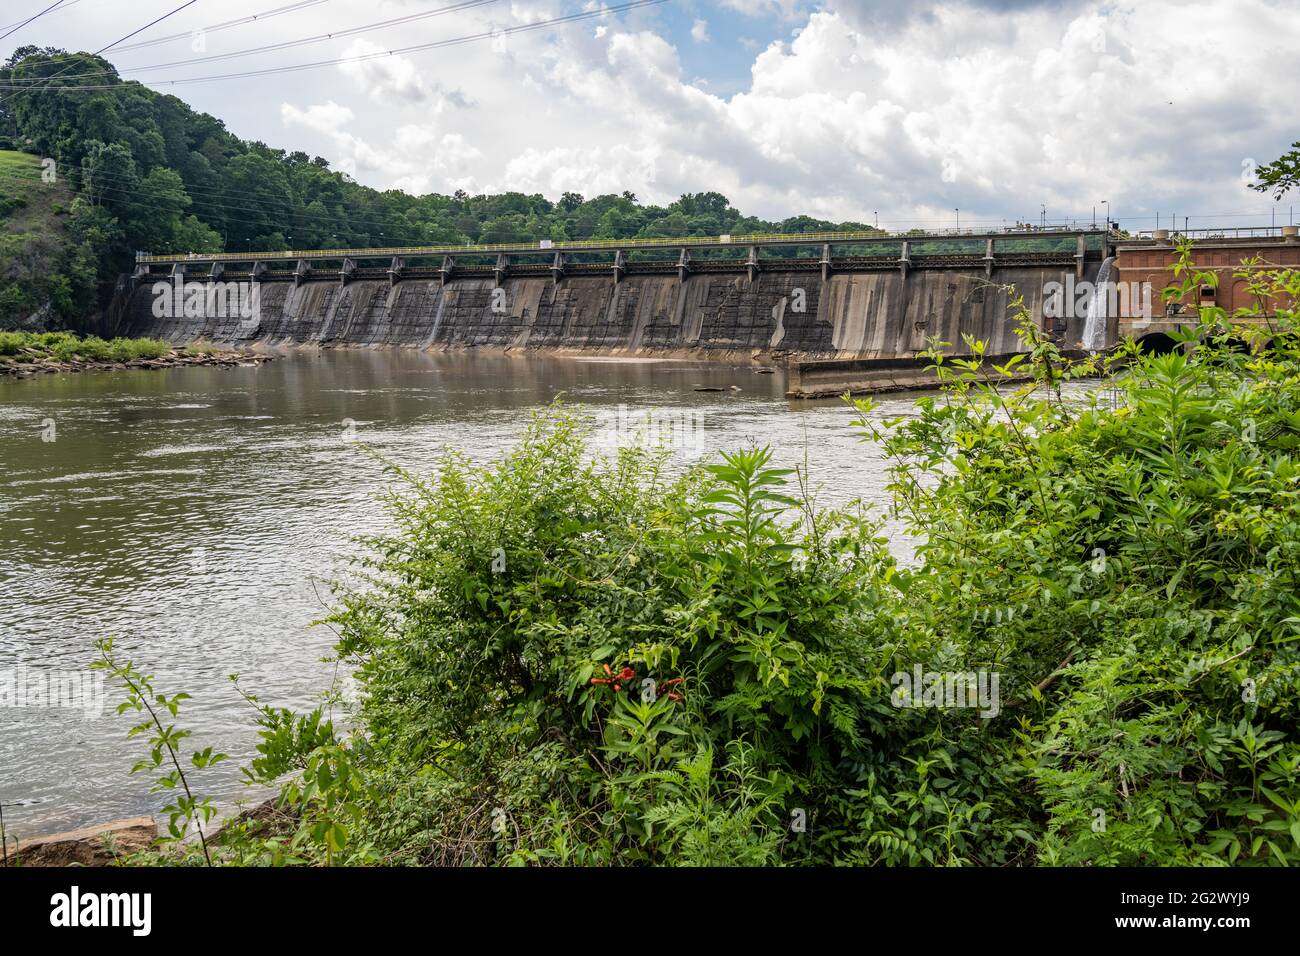 Morgan Falls Dam, a hydroelectric dam built in 1902 on the Chattahoochee River, was Atlanta's first source of water generated electricity. (USA) Stock Photo